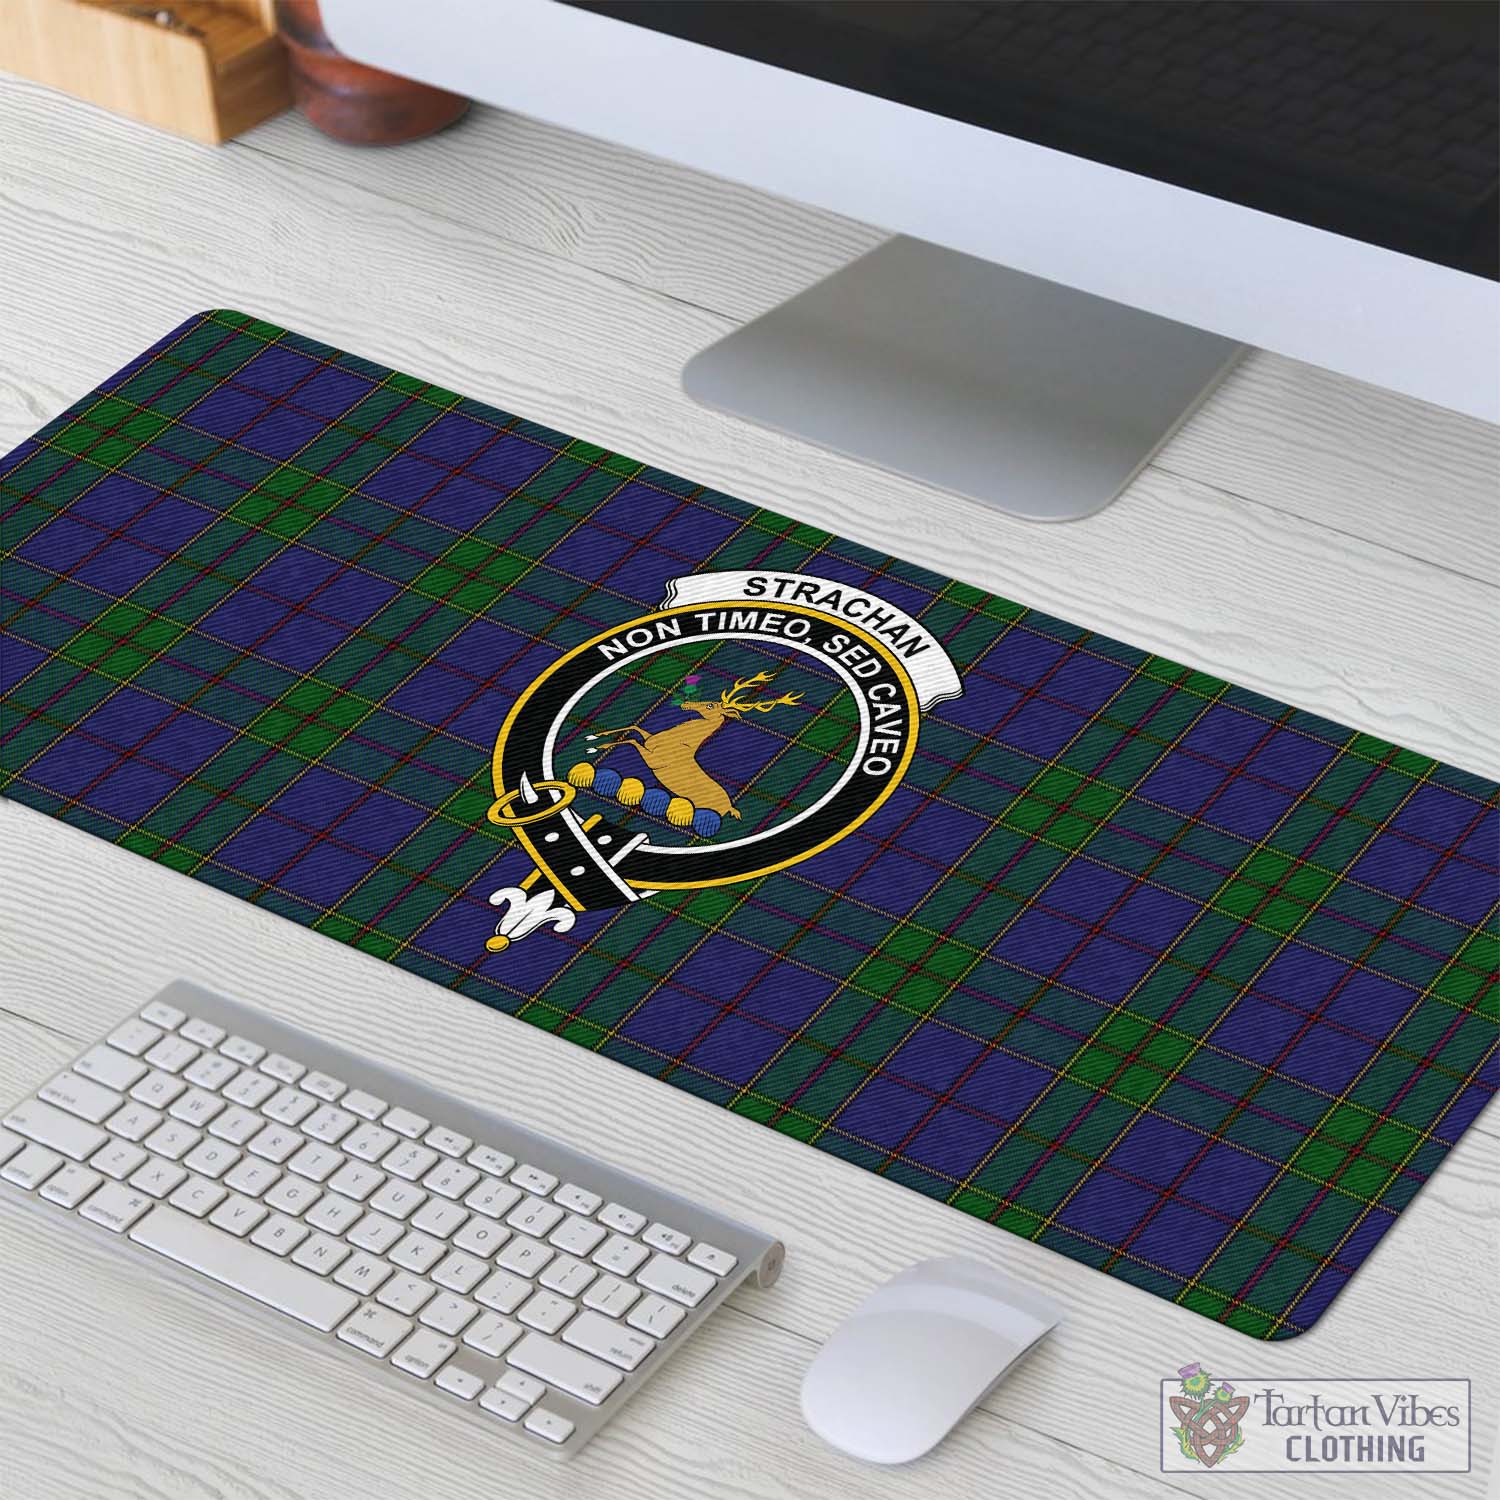 Tartan Vibes Clothing Strachan Tartan Mouse Pad with Family Crest